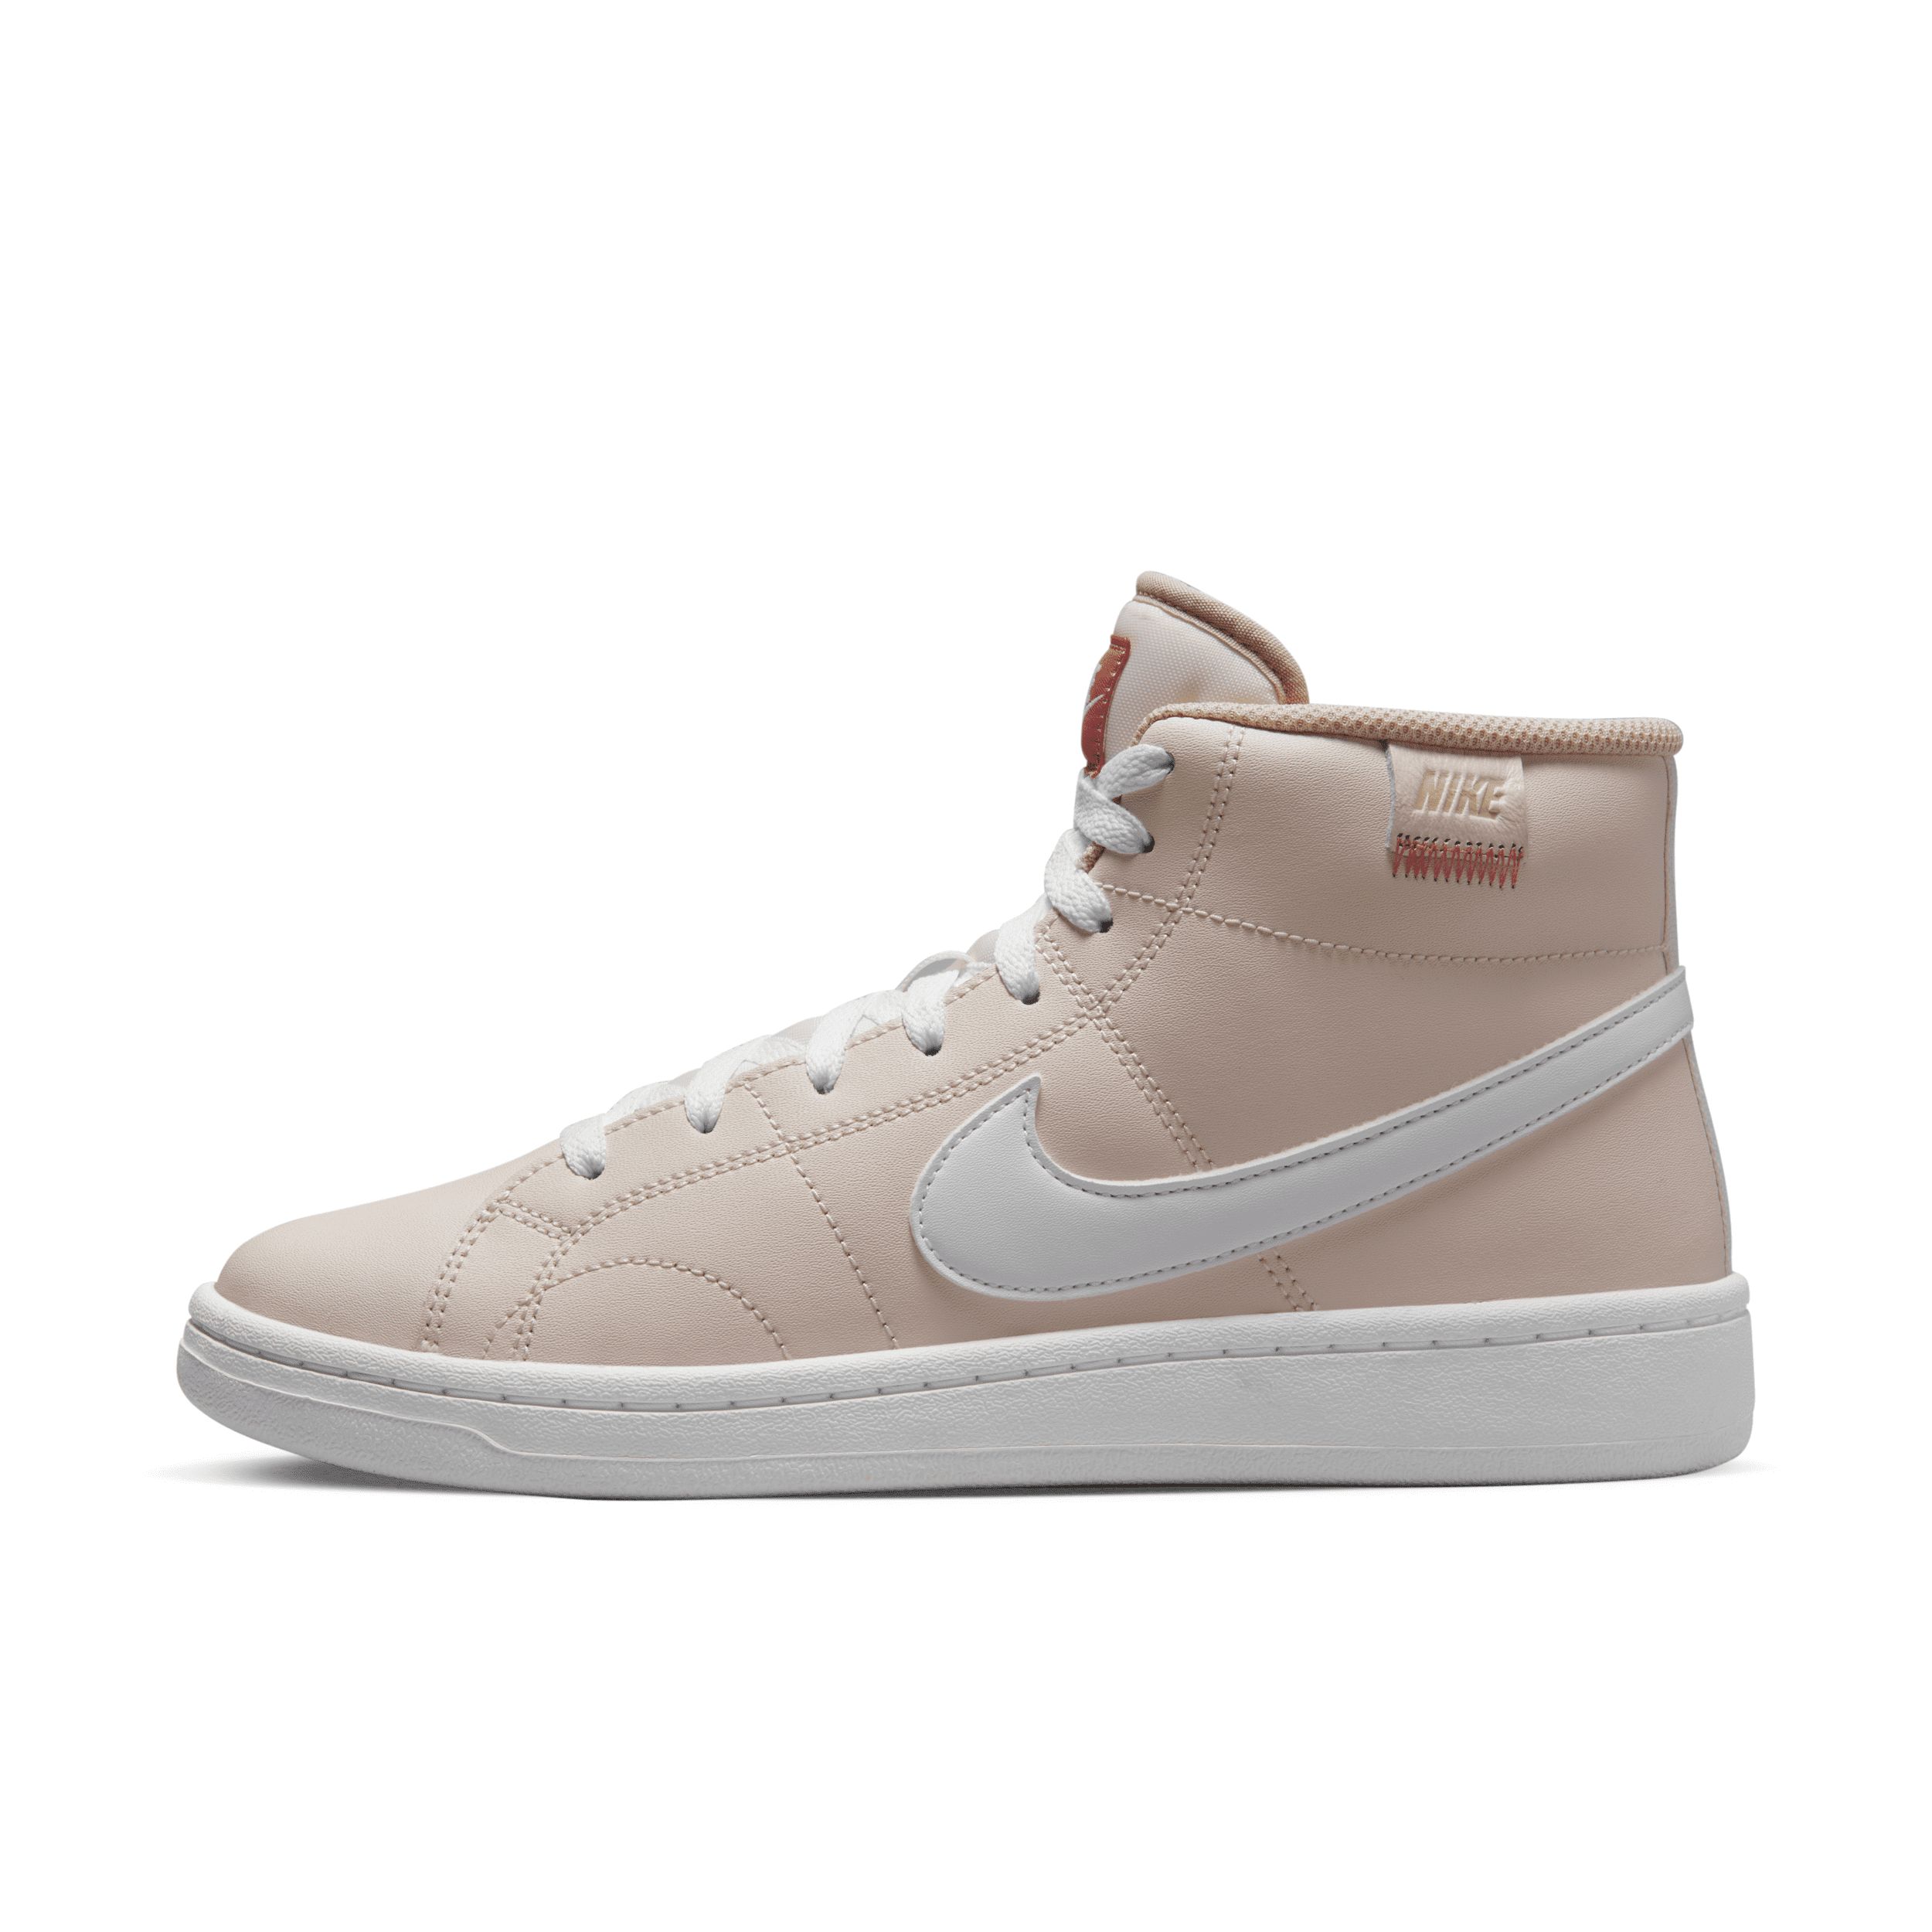 Nike Women's Court Royale 2 Mid Shoes in Pink, Size: 10 | FD0286-600 | Nike (US)